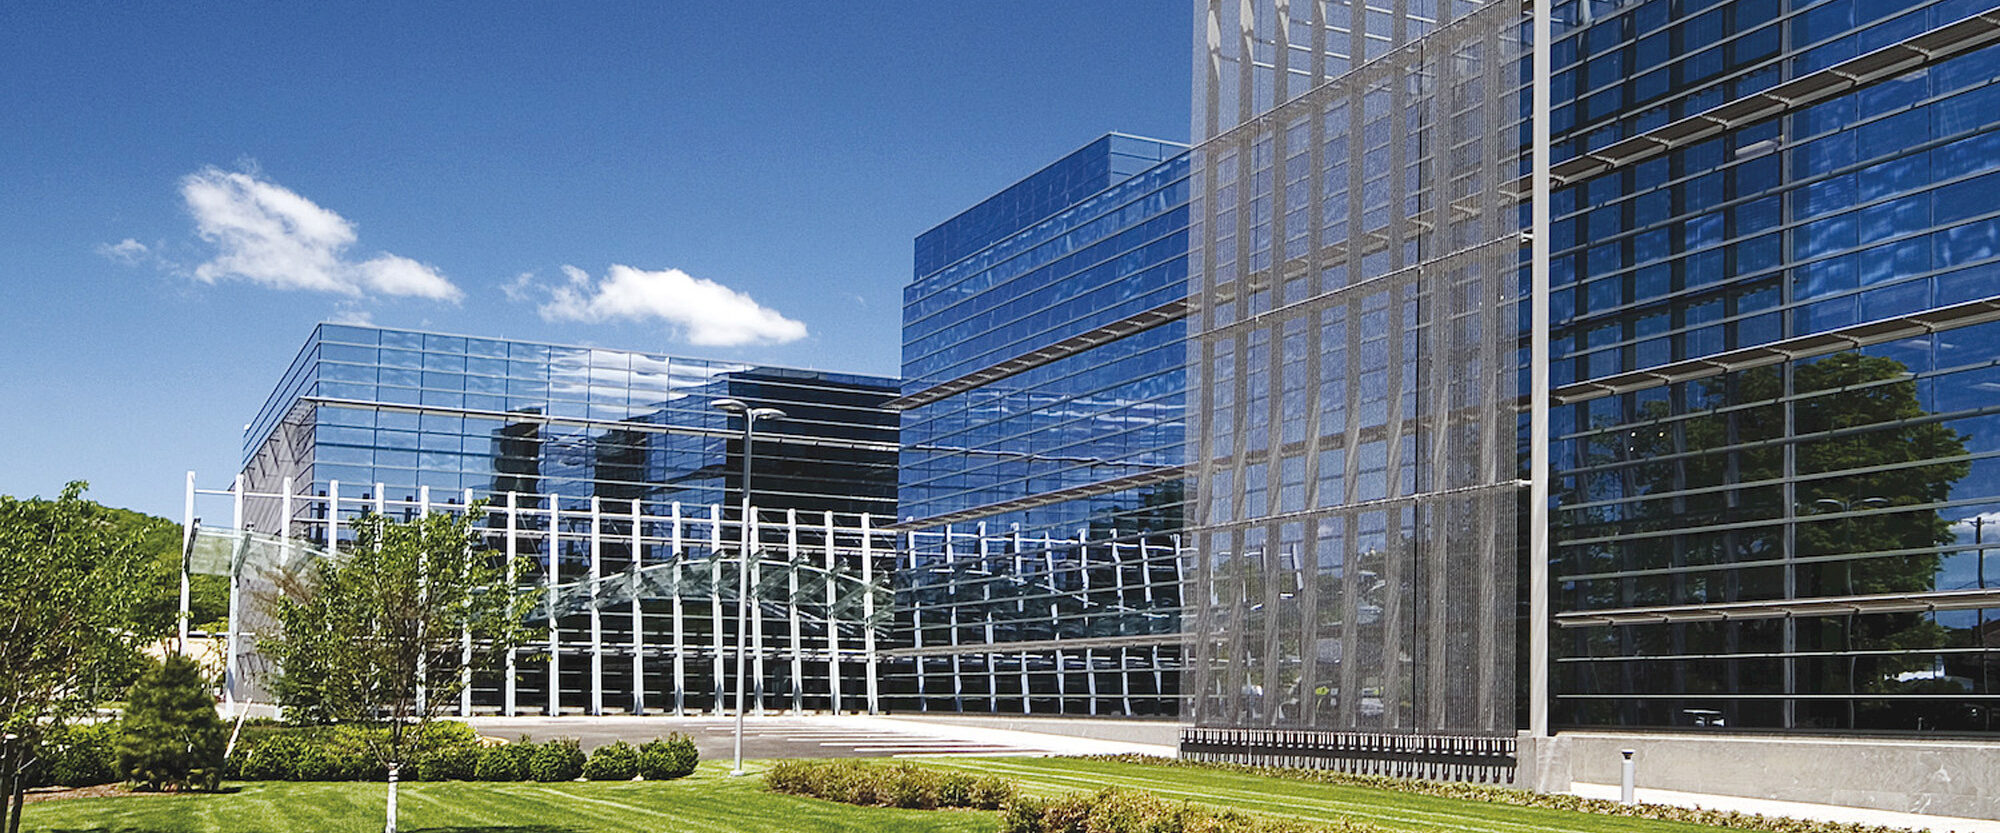 Modern architectural design featuring a commercial building with a reflective glass facade, showcasing a blend of transparent and opaque elements, surrounded by manicured landscaping under a clear blue sky.